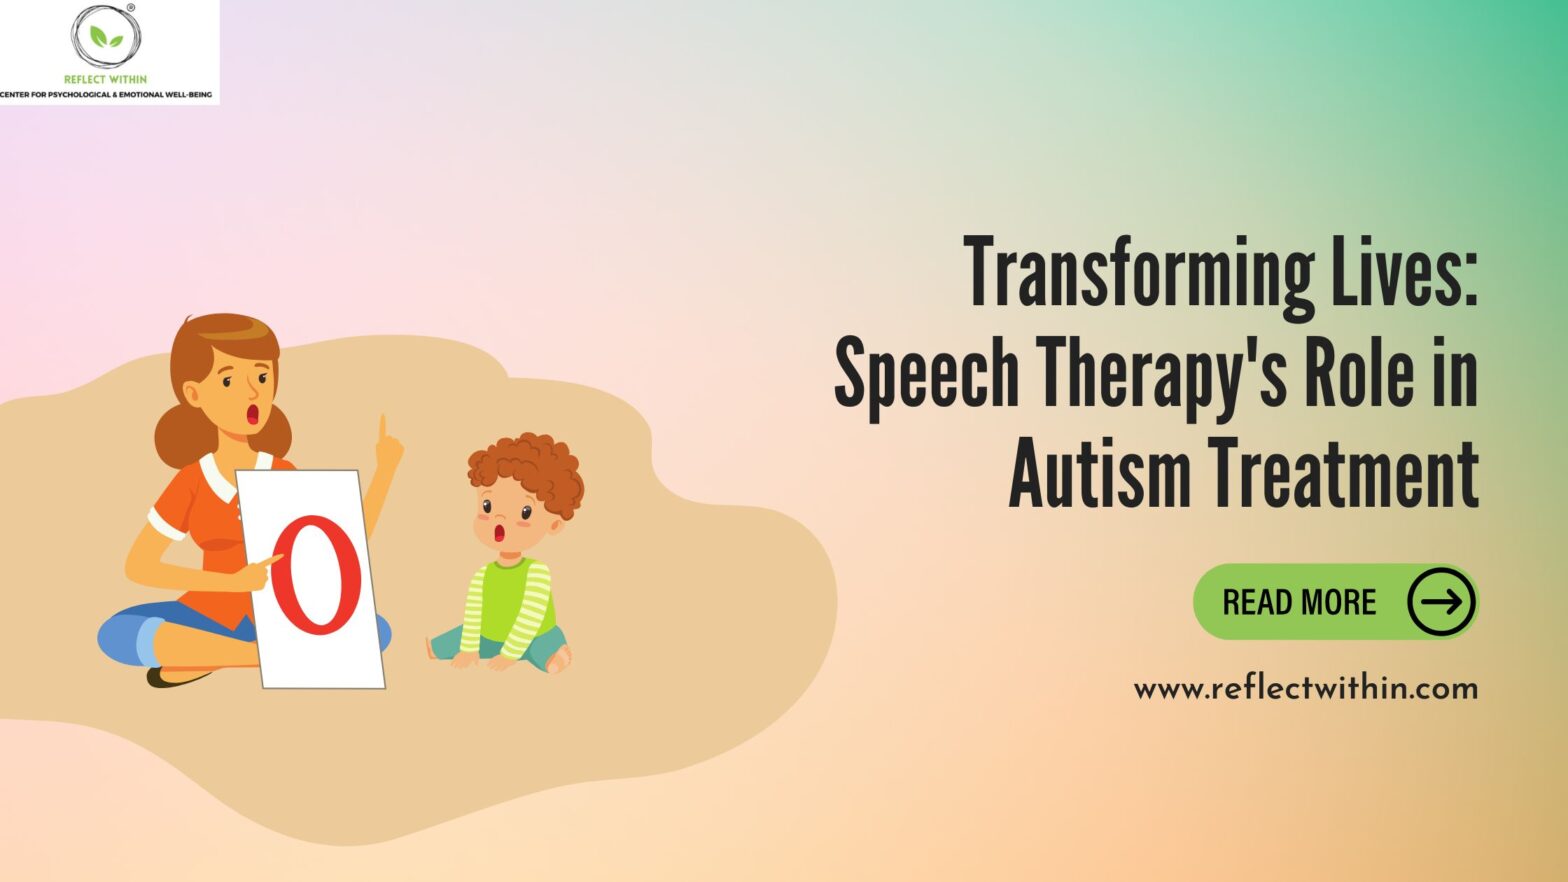 Speech Therapy's Role in Autism Treatment